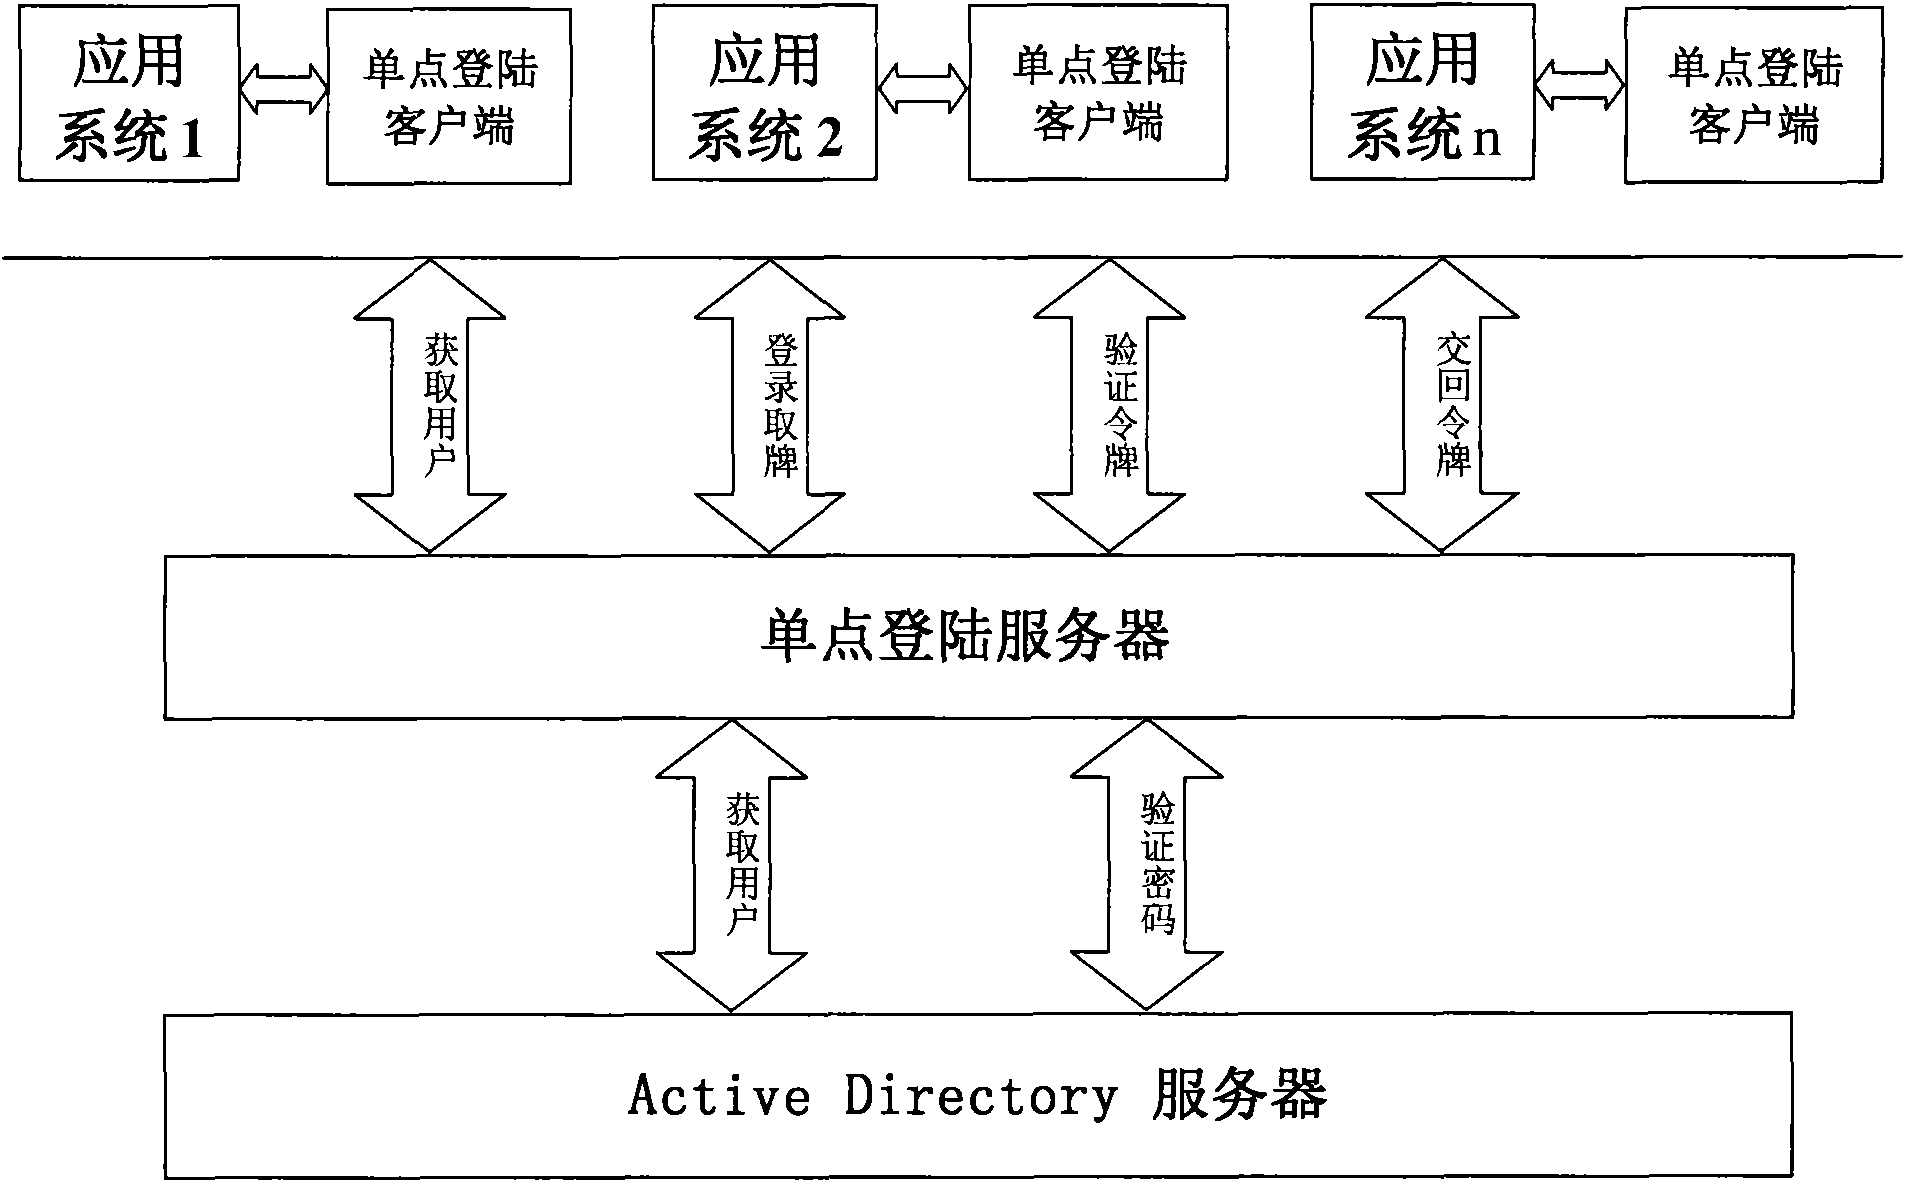 Active Directory-based uniform authentication realizing method applied to TV station